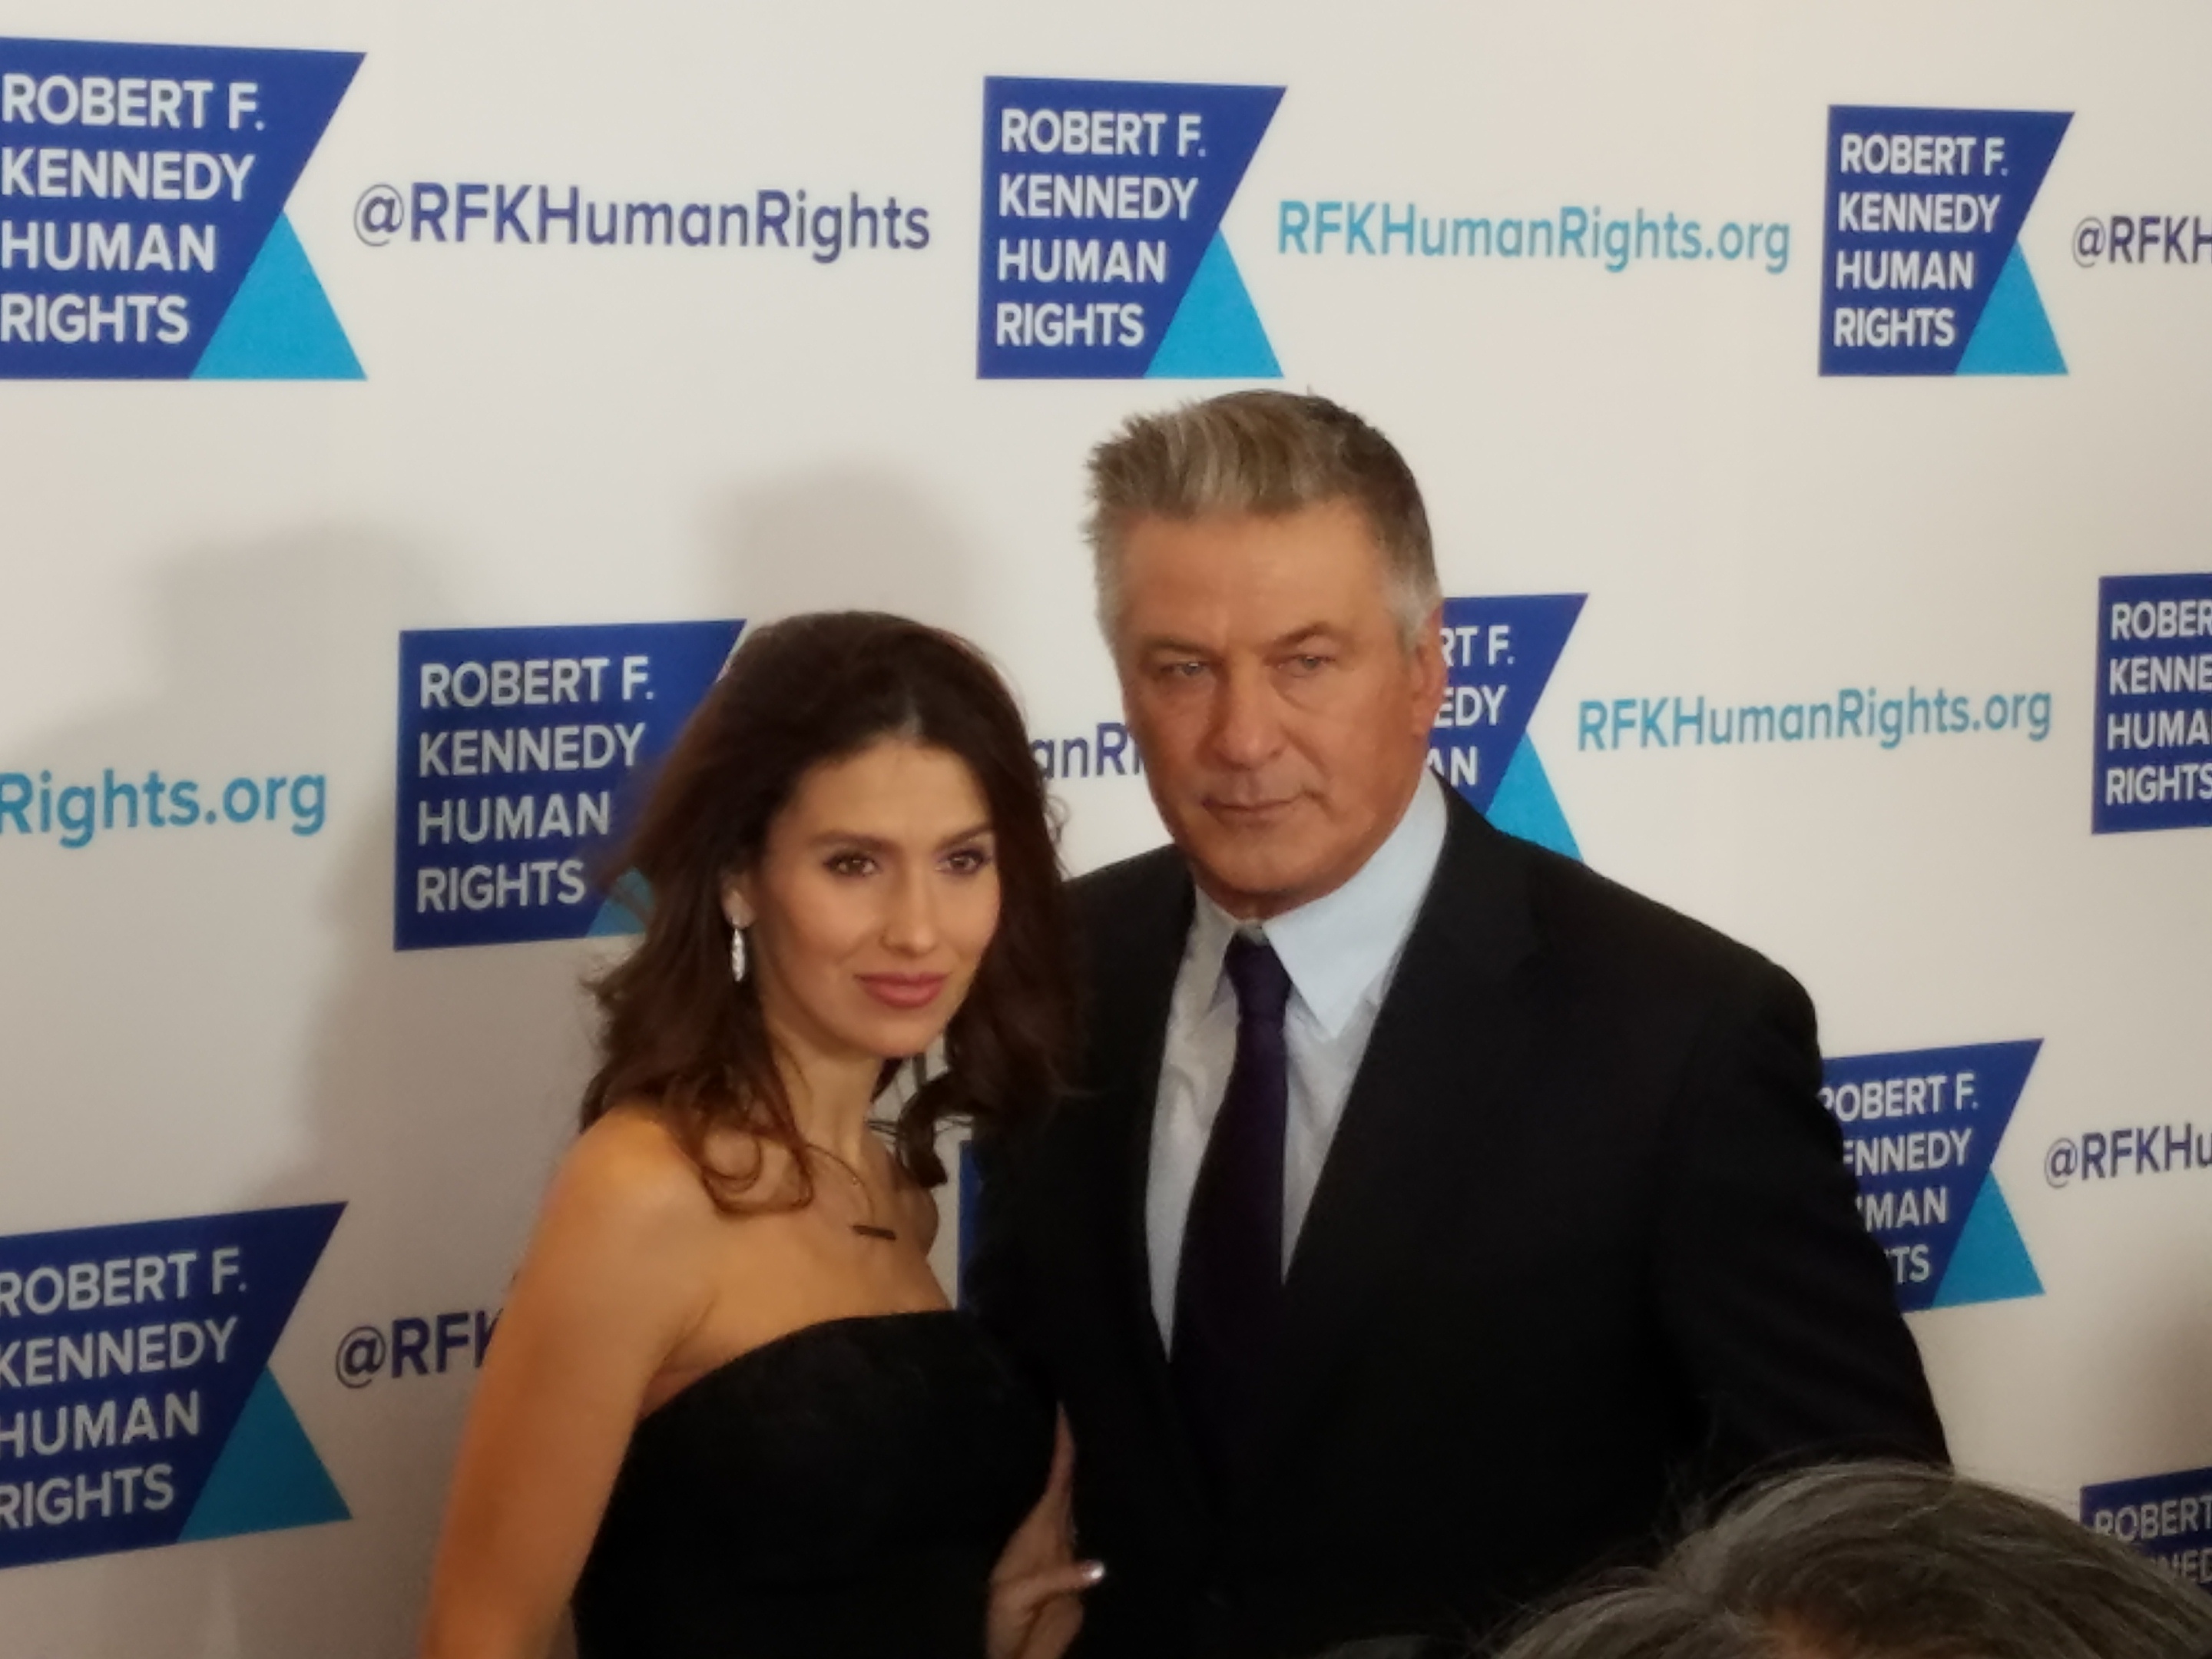 Highlights from the 2017 Ripple of Hope Awards at the New York Hilton